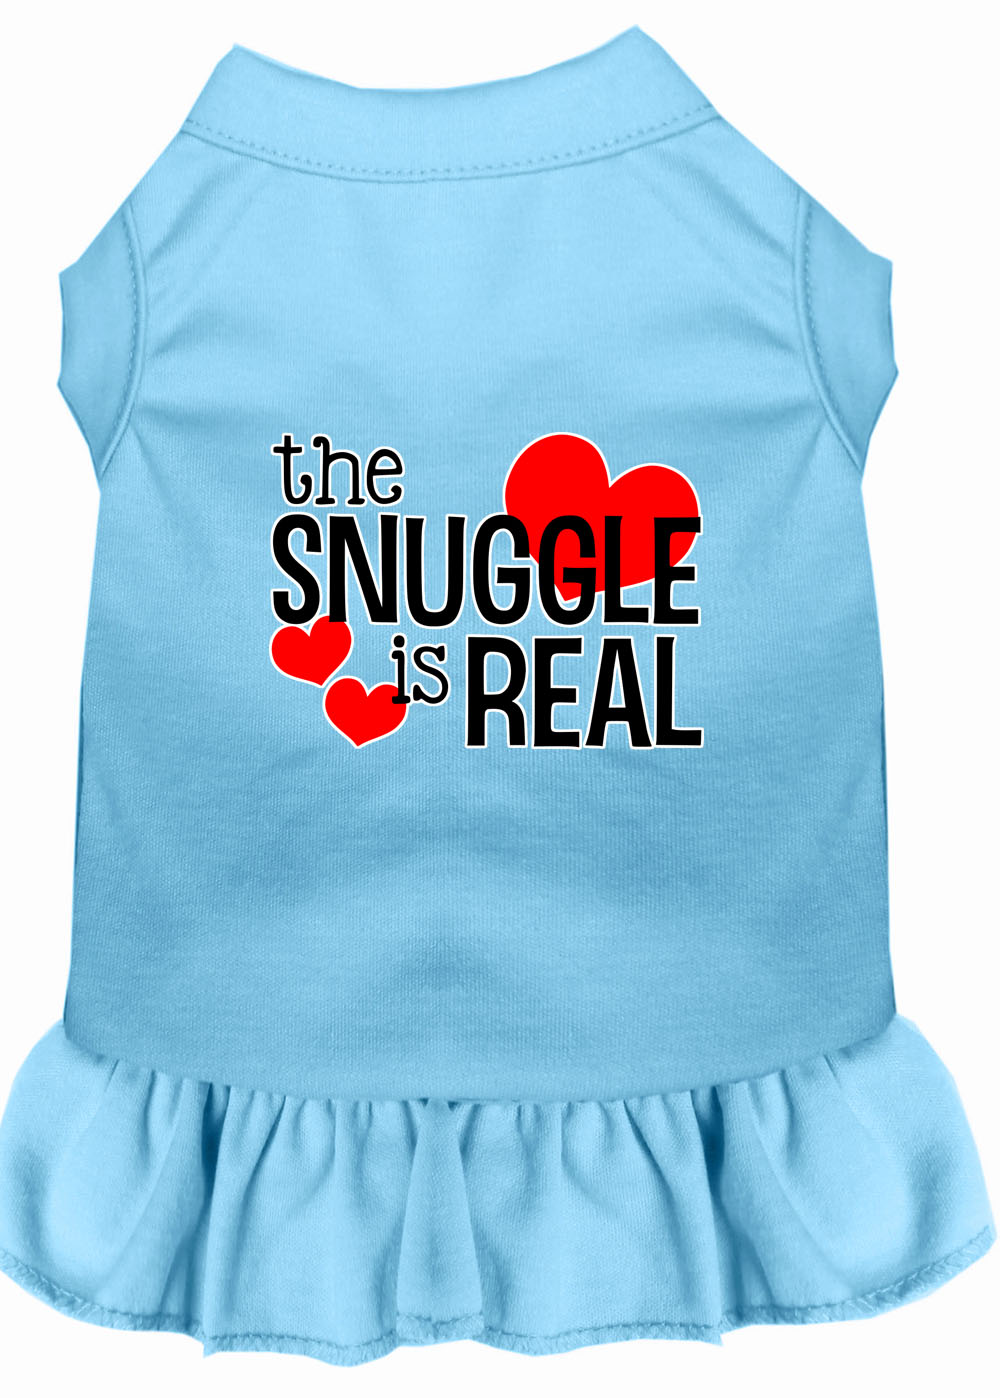 The Snuggle is Real Screen Print Dog Dress Baby Blue Lg